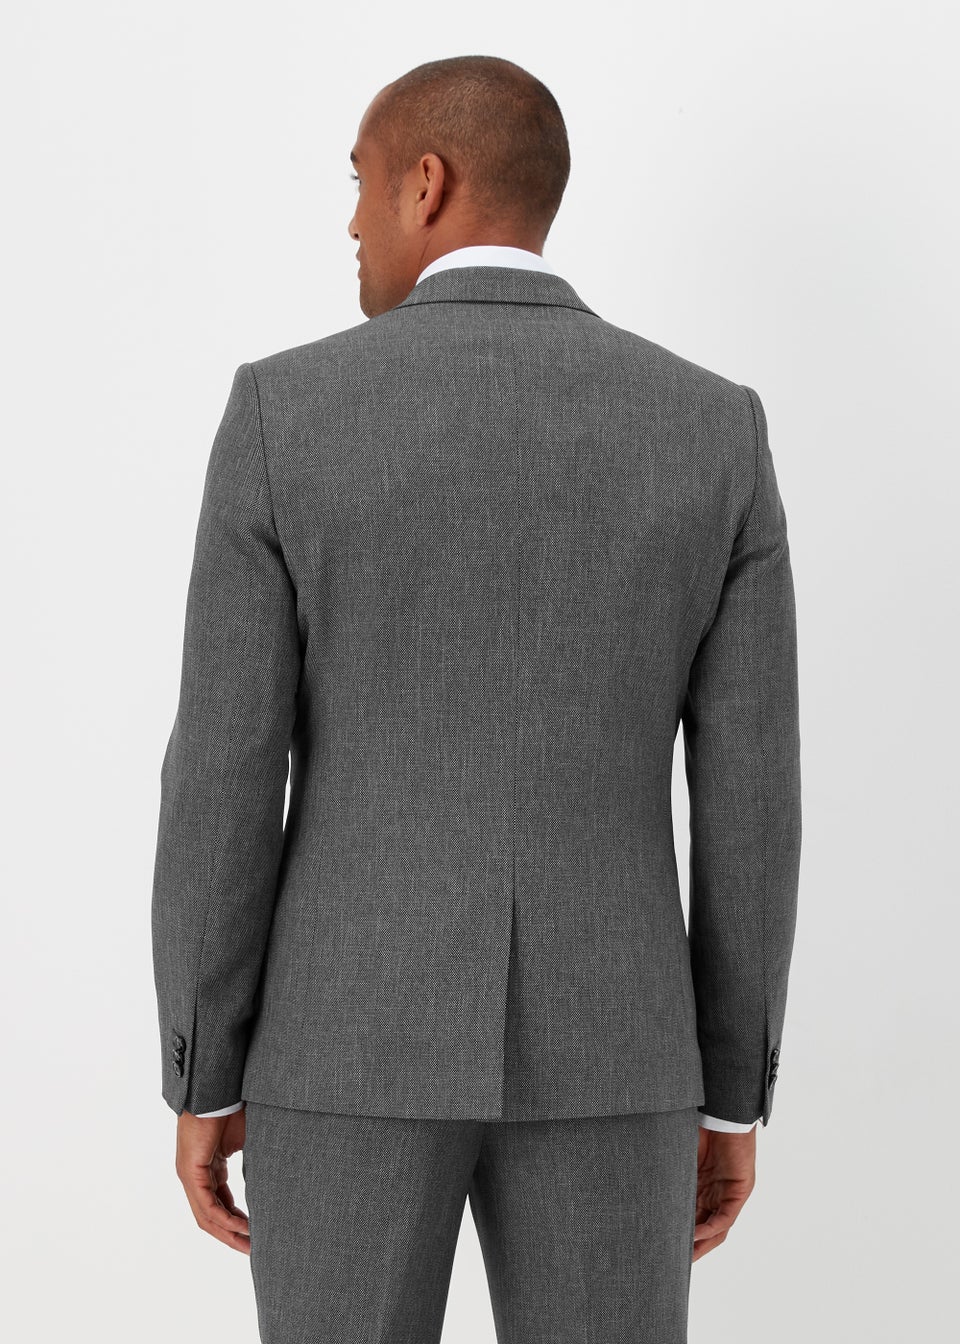 Taylor & Wright Albert Charcoal Slim Fit Suit Jacket